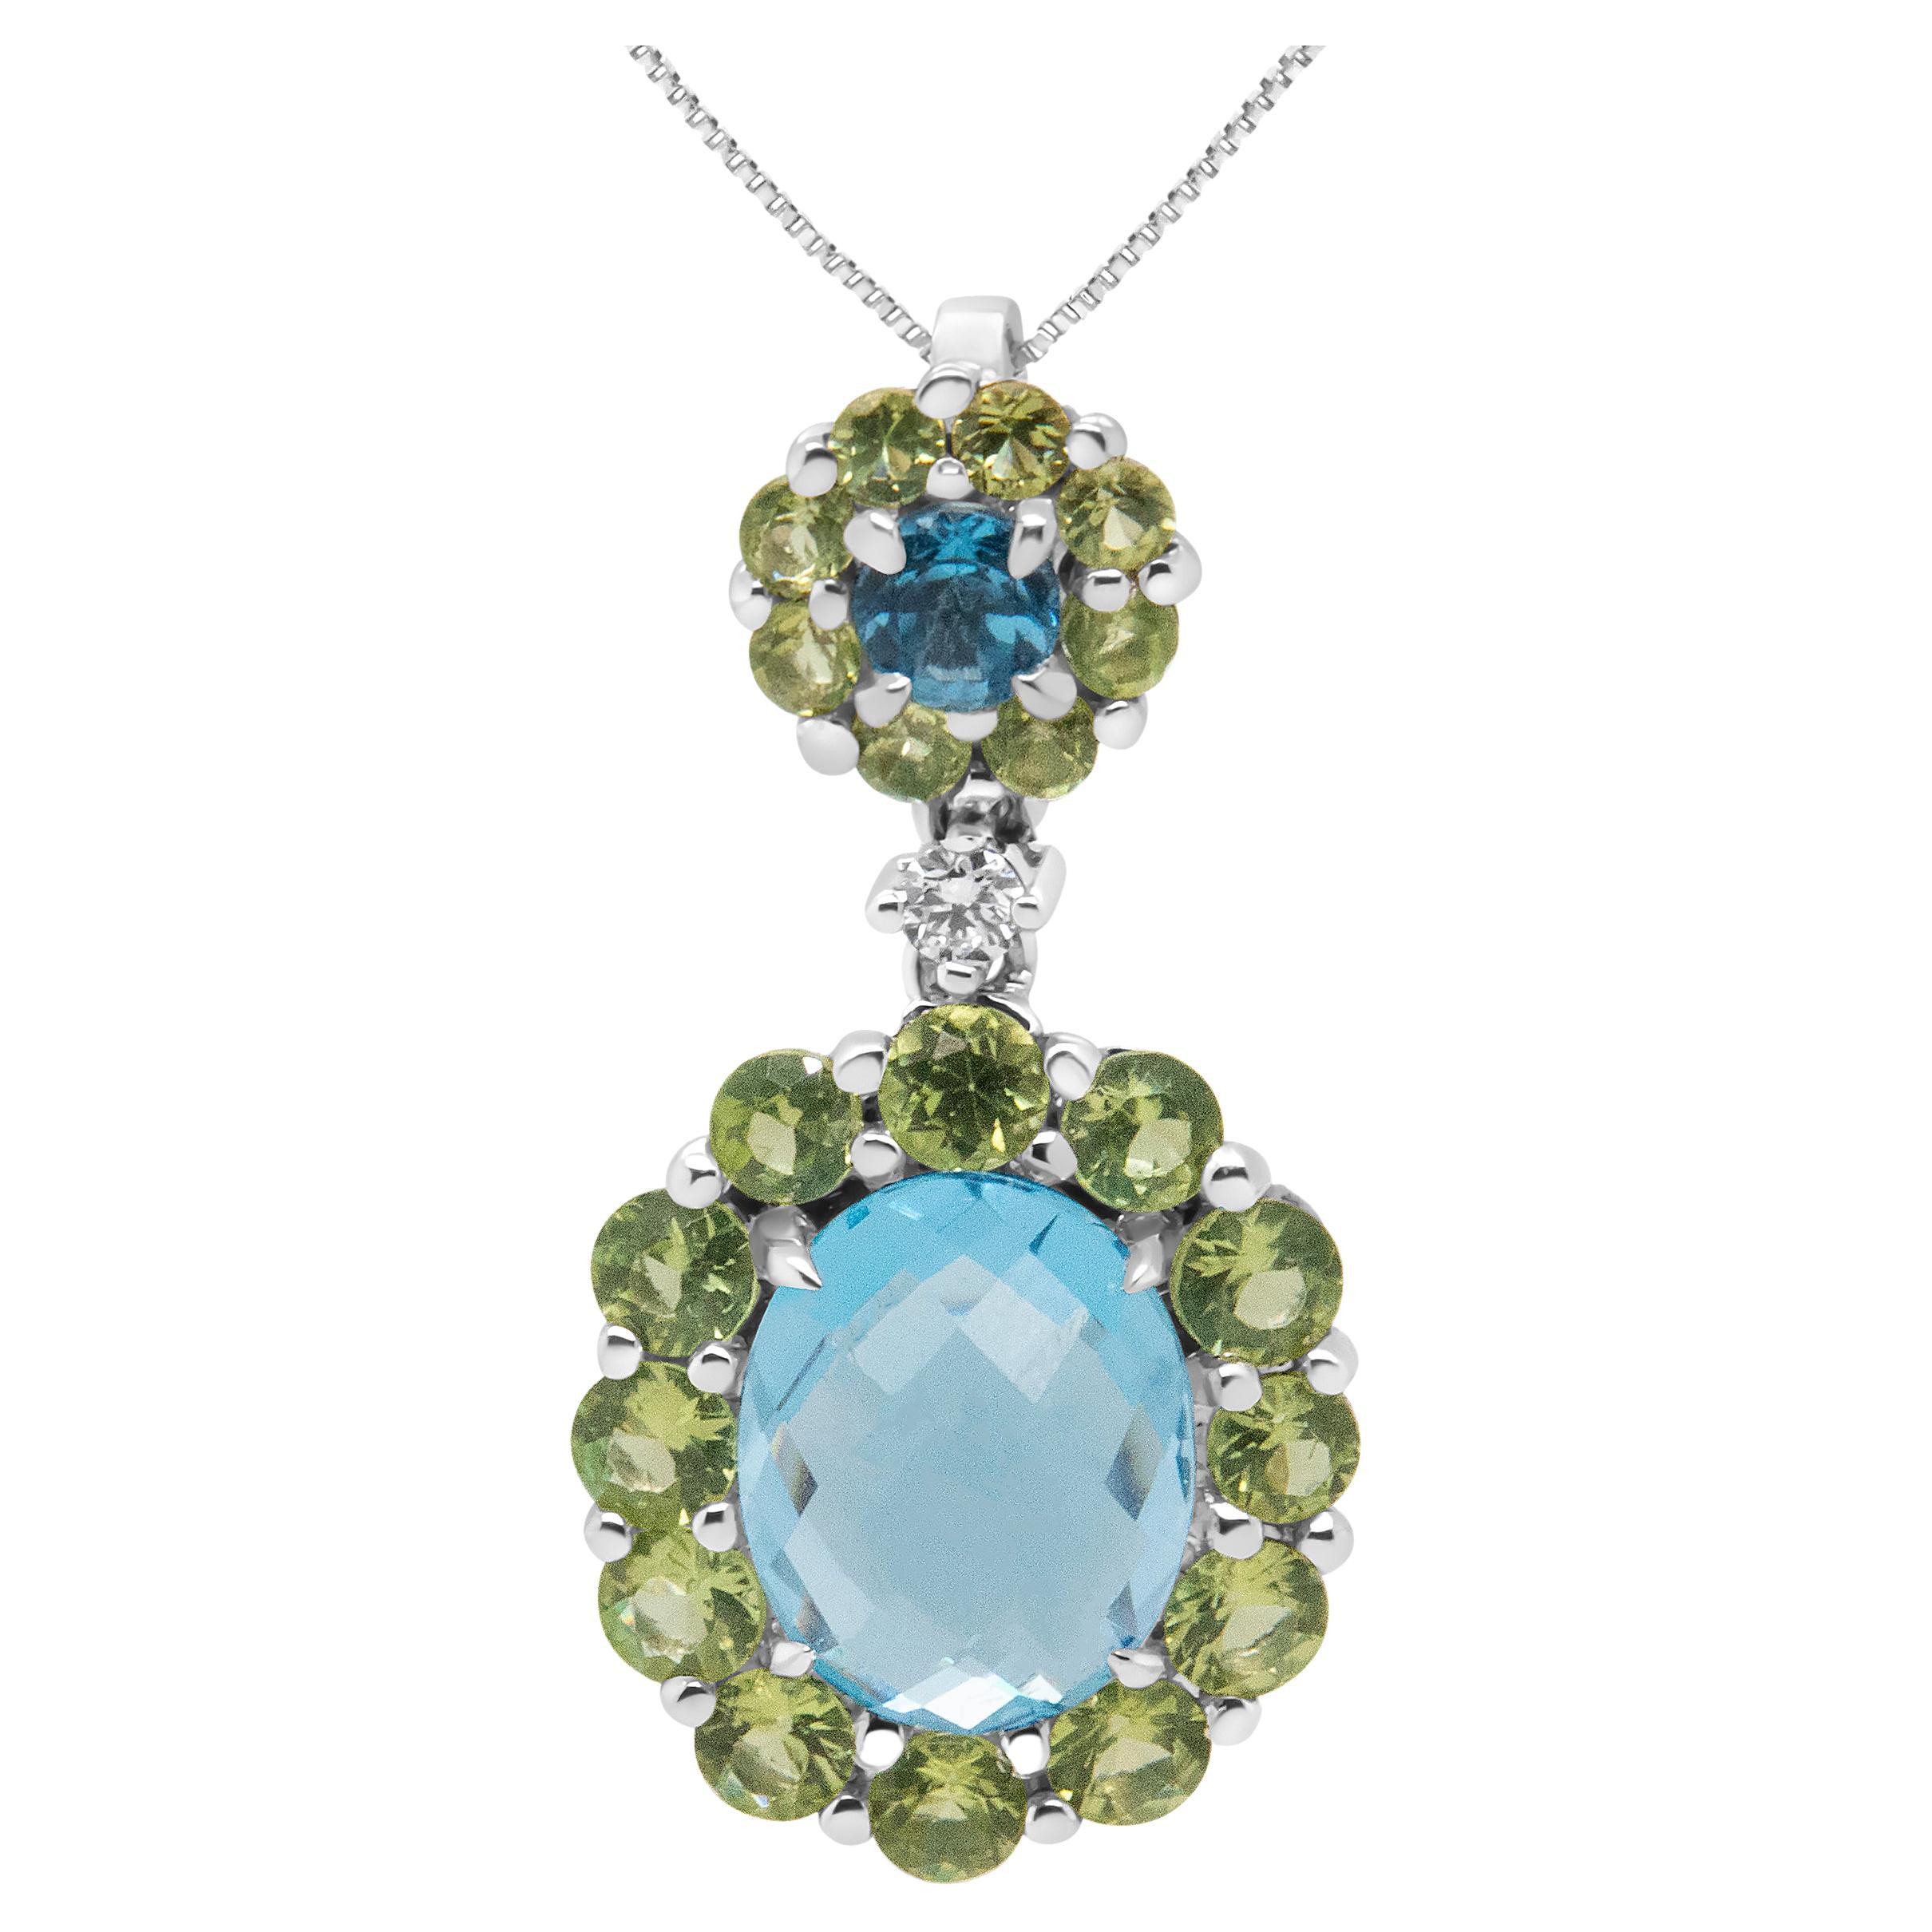 18K White Gold 0.05 Ct Diamond and Blue Topaz and Green Peridot Pendant Necklace